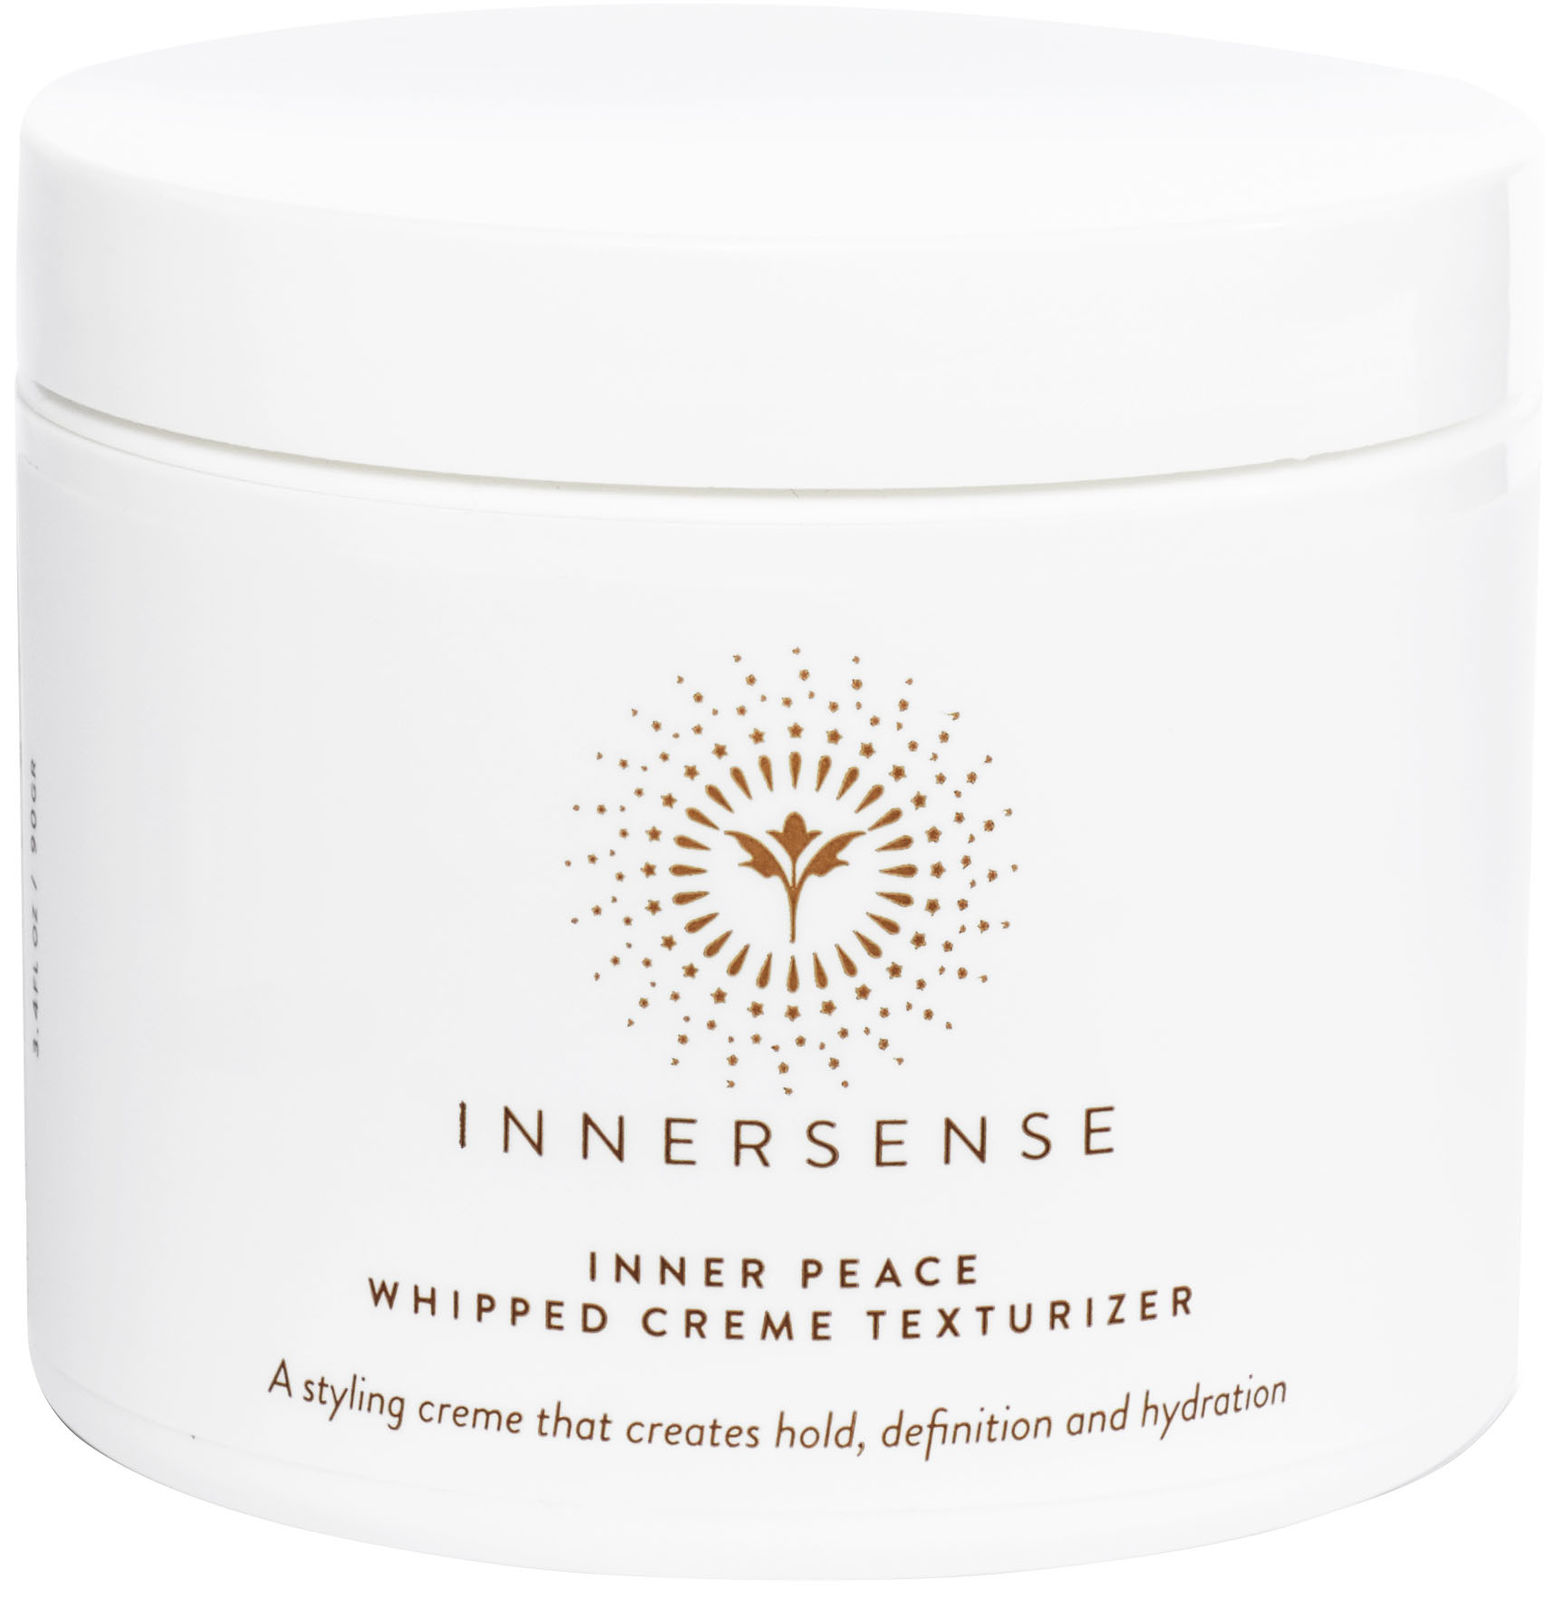 Billede af Innersense Organic Beauty Inner Peace Whipped Creme Texturizer 101 ml.